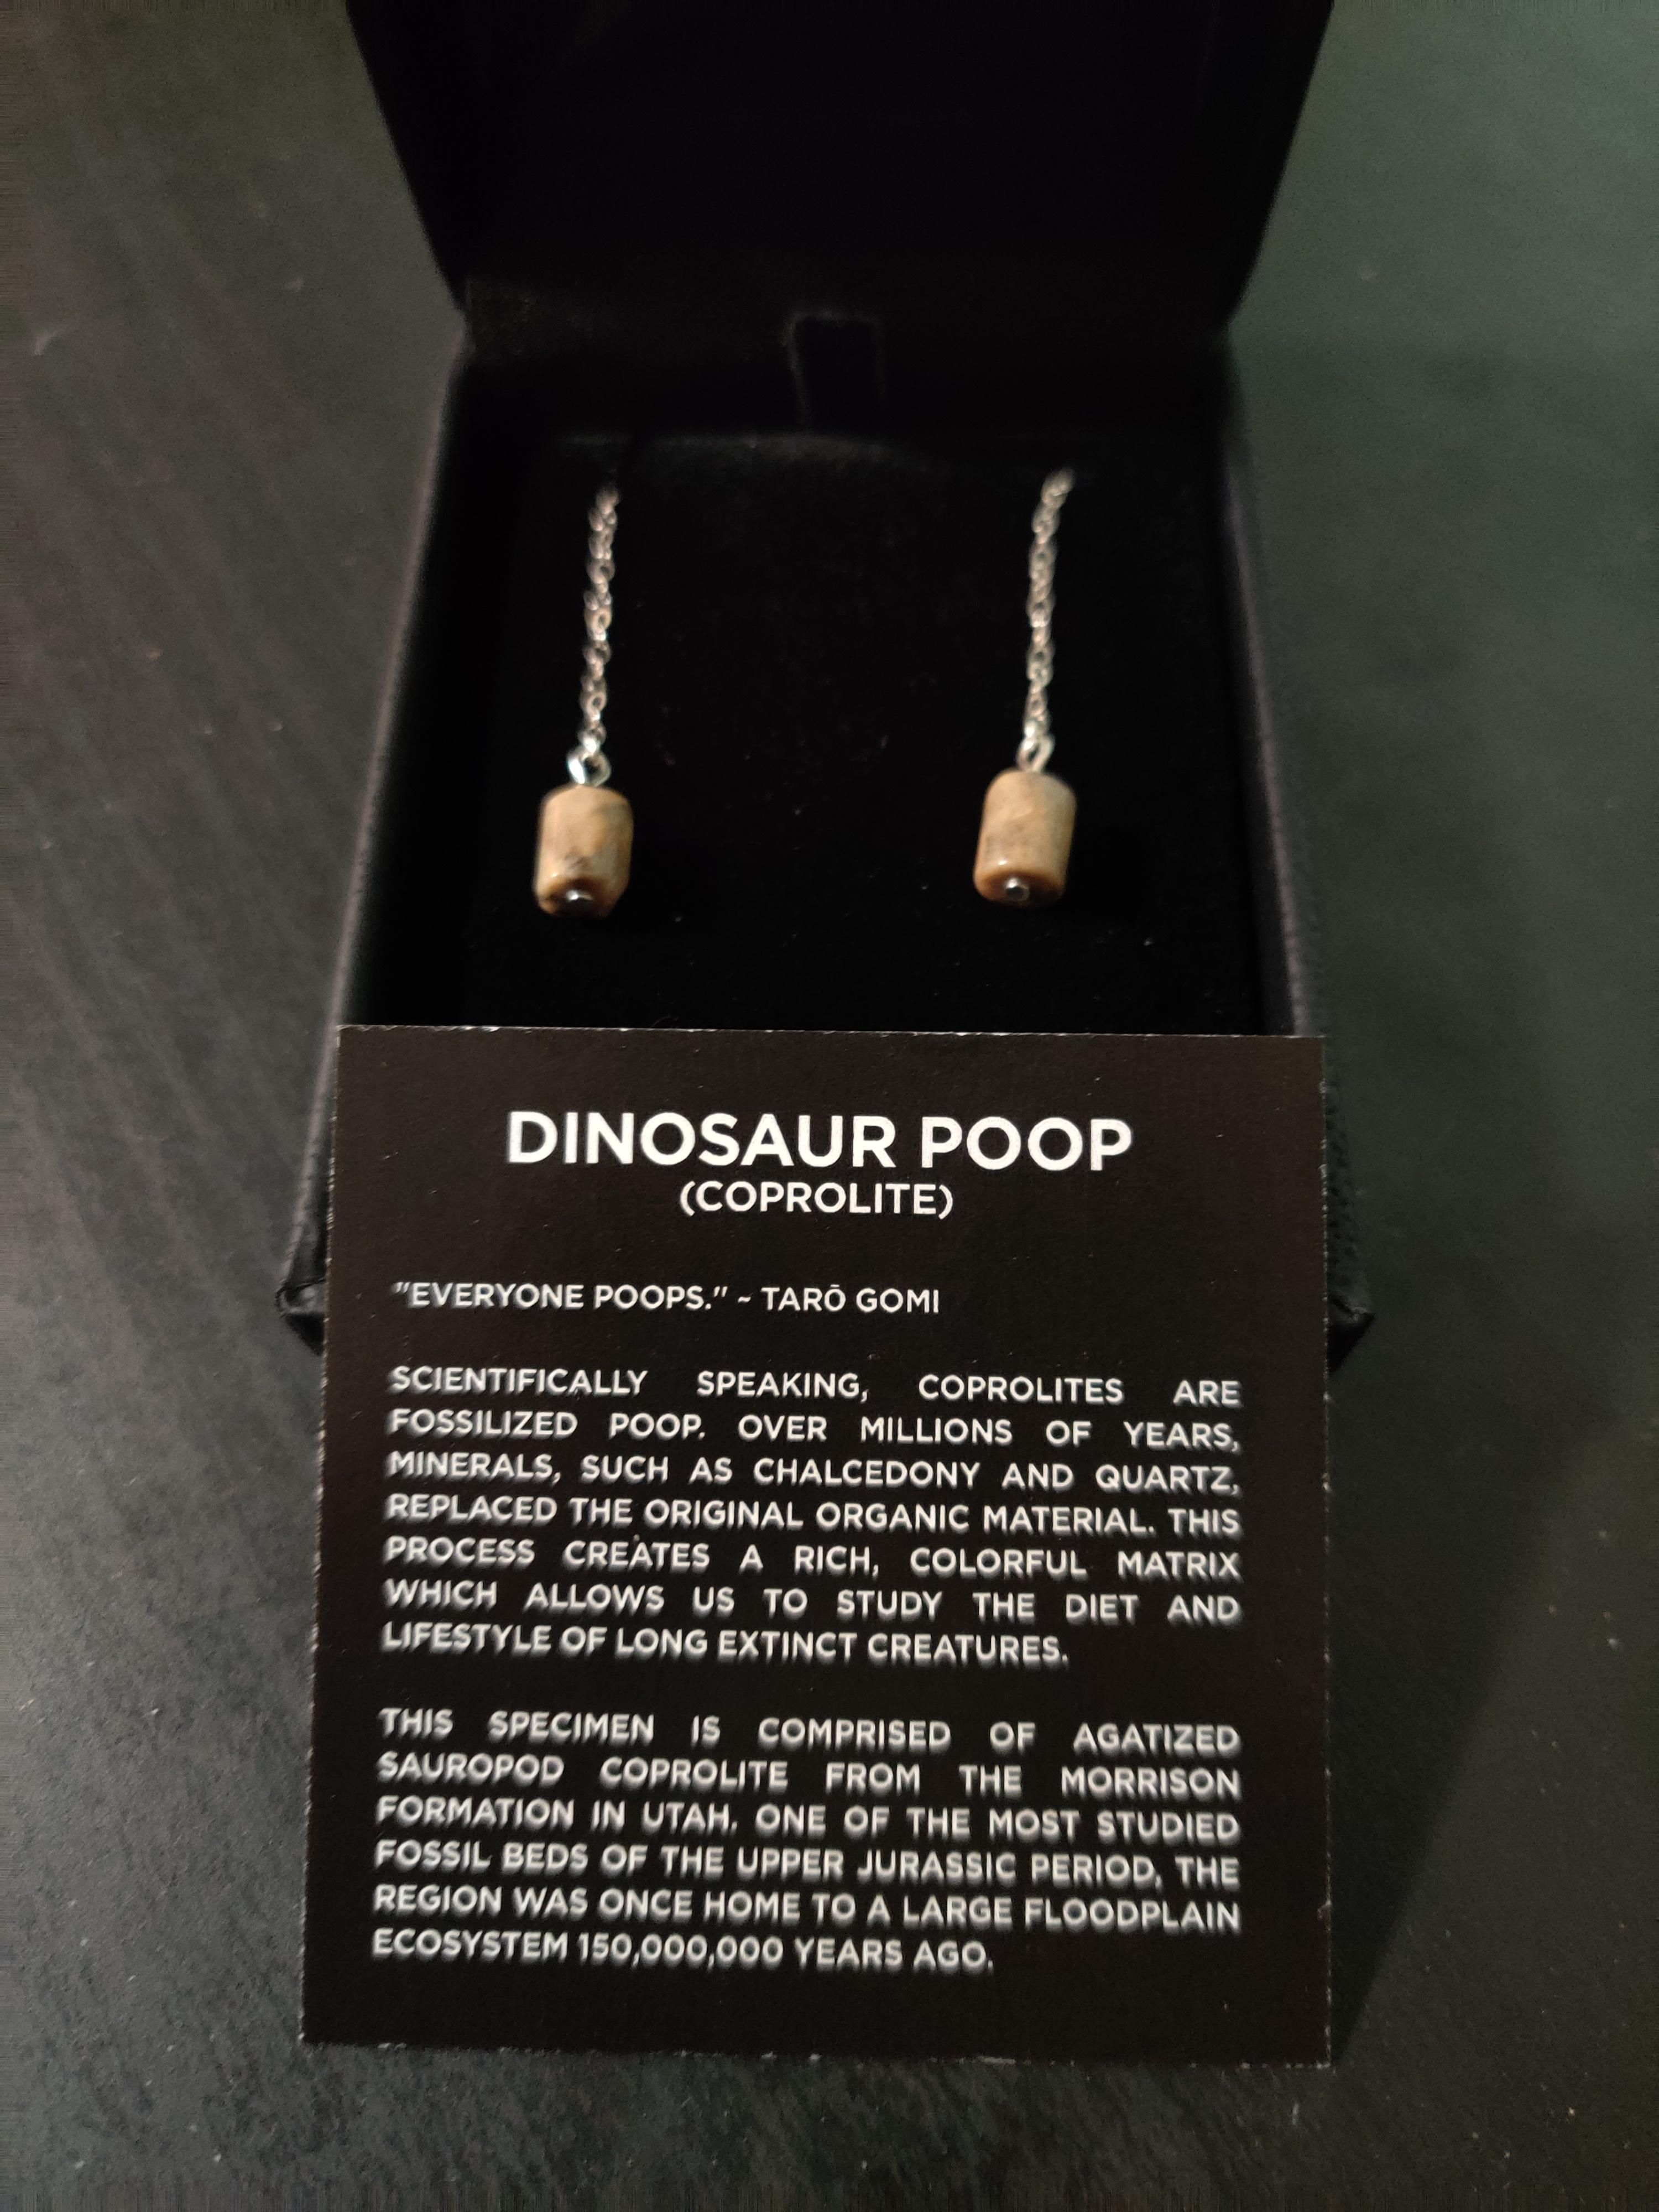 I told my husband I just wanted some "shitty earrings" for Christmas. He delivered...